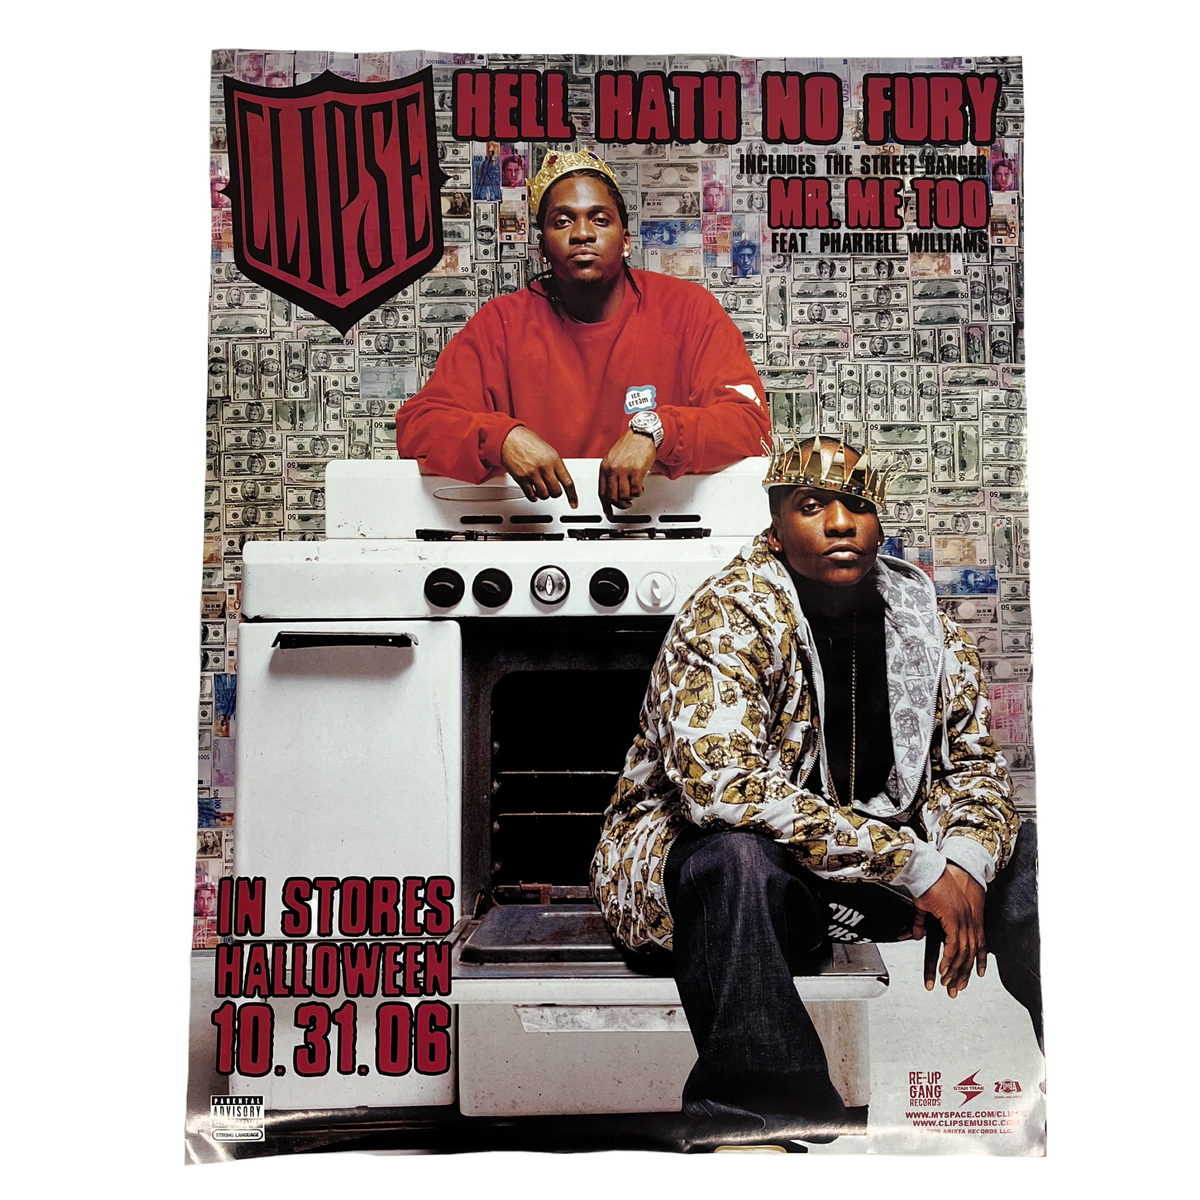 Vintage Clipse &quot;Hell Hath No Fury&quot; Re-Up Gang Records/Star Trak Entertainment Promotional Poster